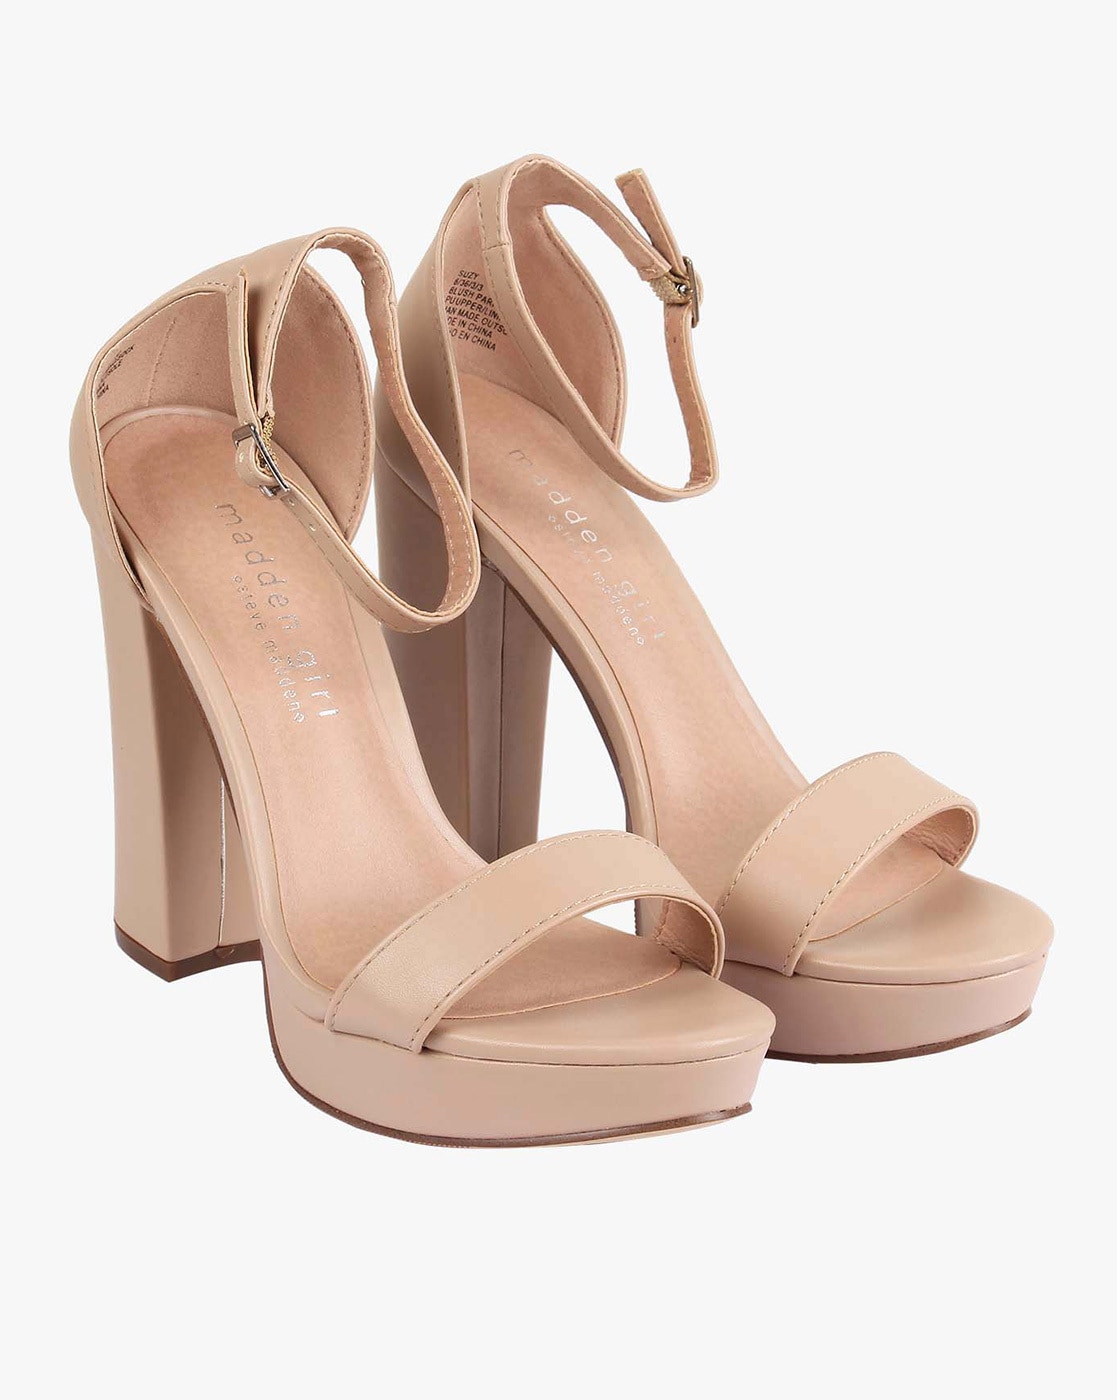 chunky nude sandals